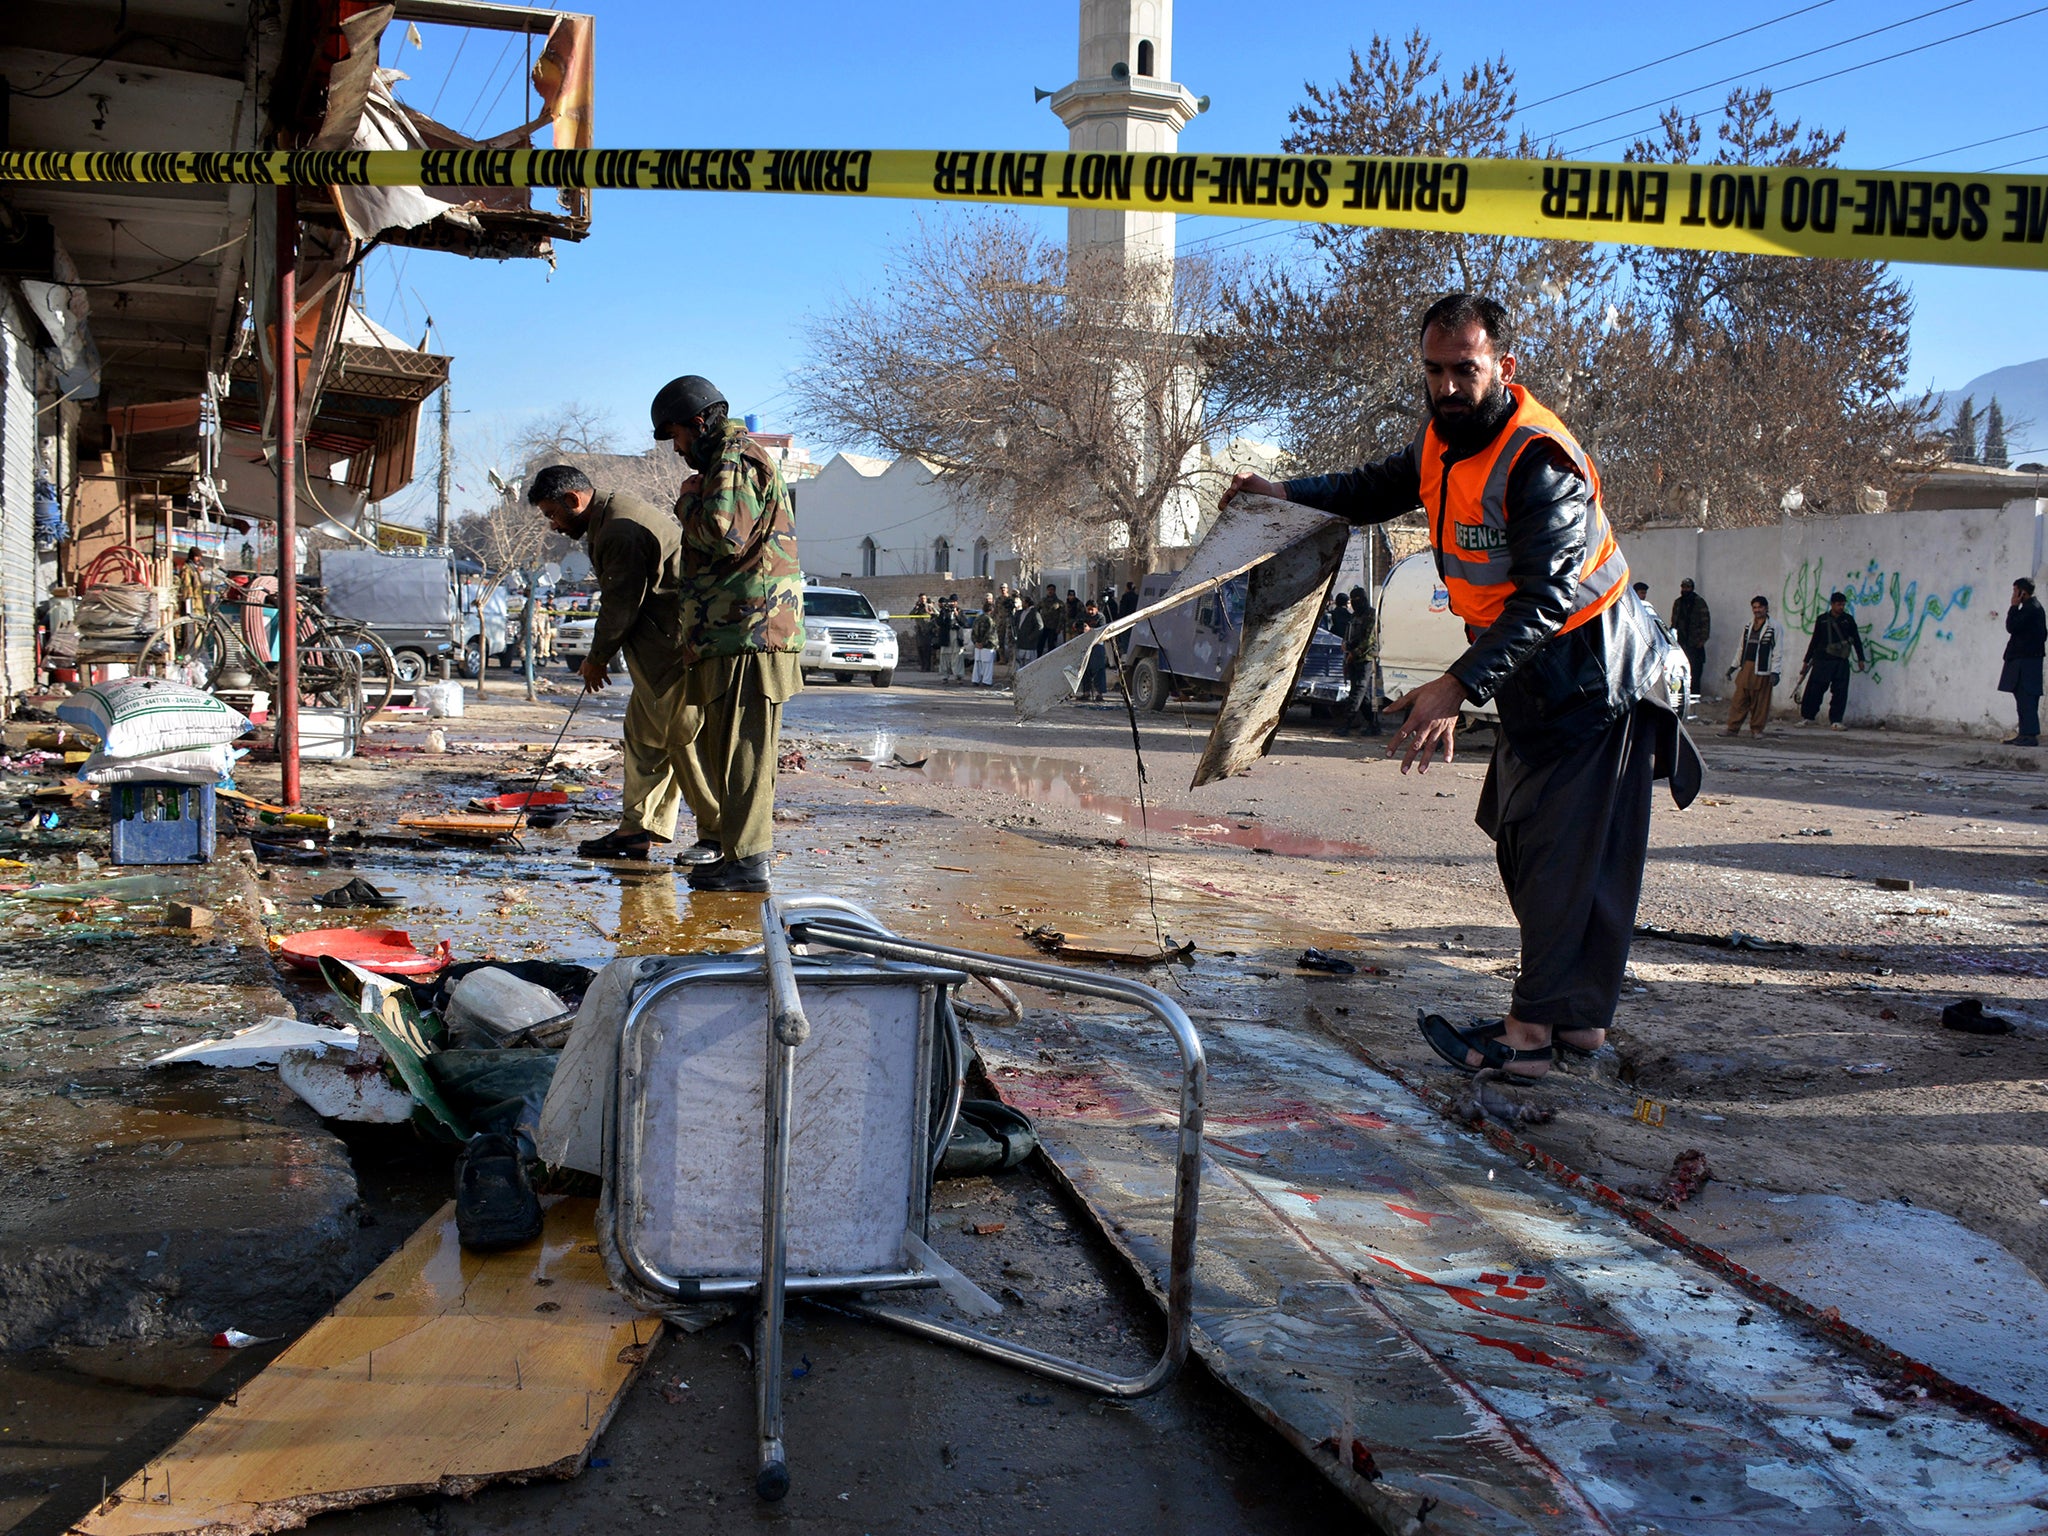 Pakistani security officials examine at the site of suicide bombing in Quetta, Pakistan. The suicide attack on a polio vaccination center in southwestern Pakistan killed more than a dozen people and wounded many, officials said.